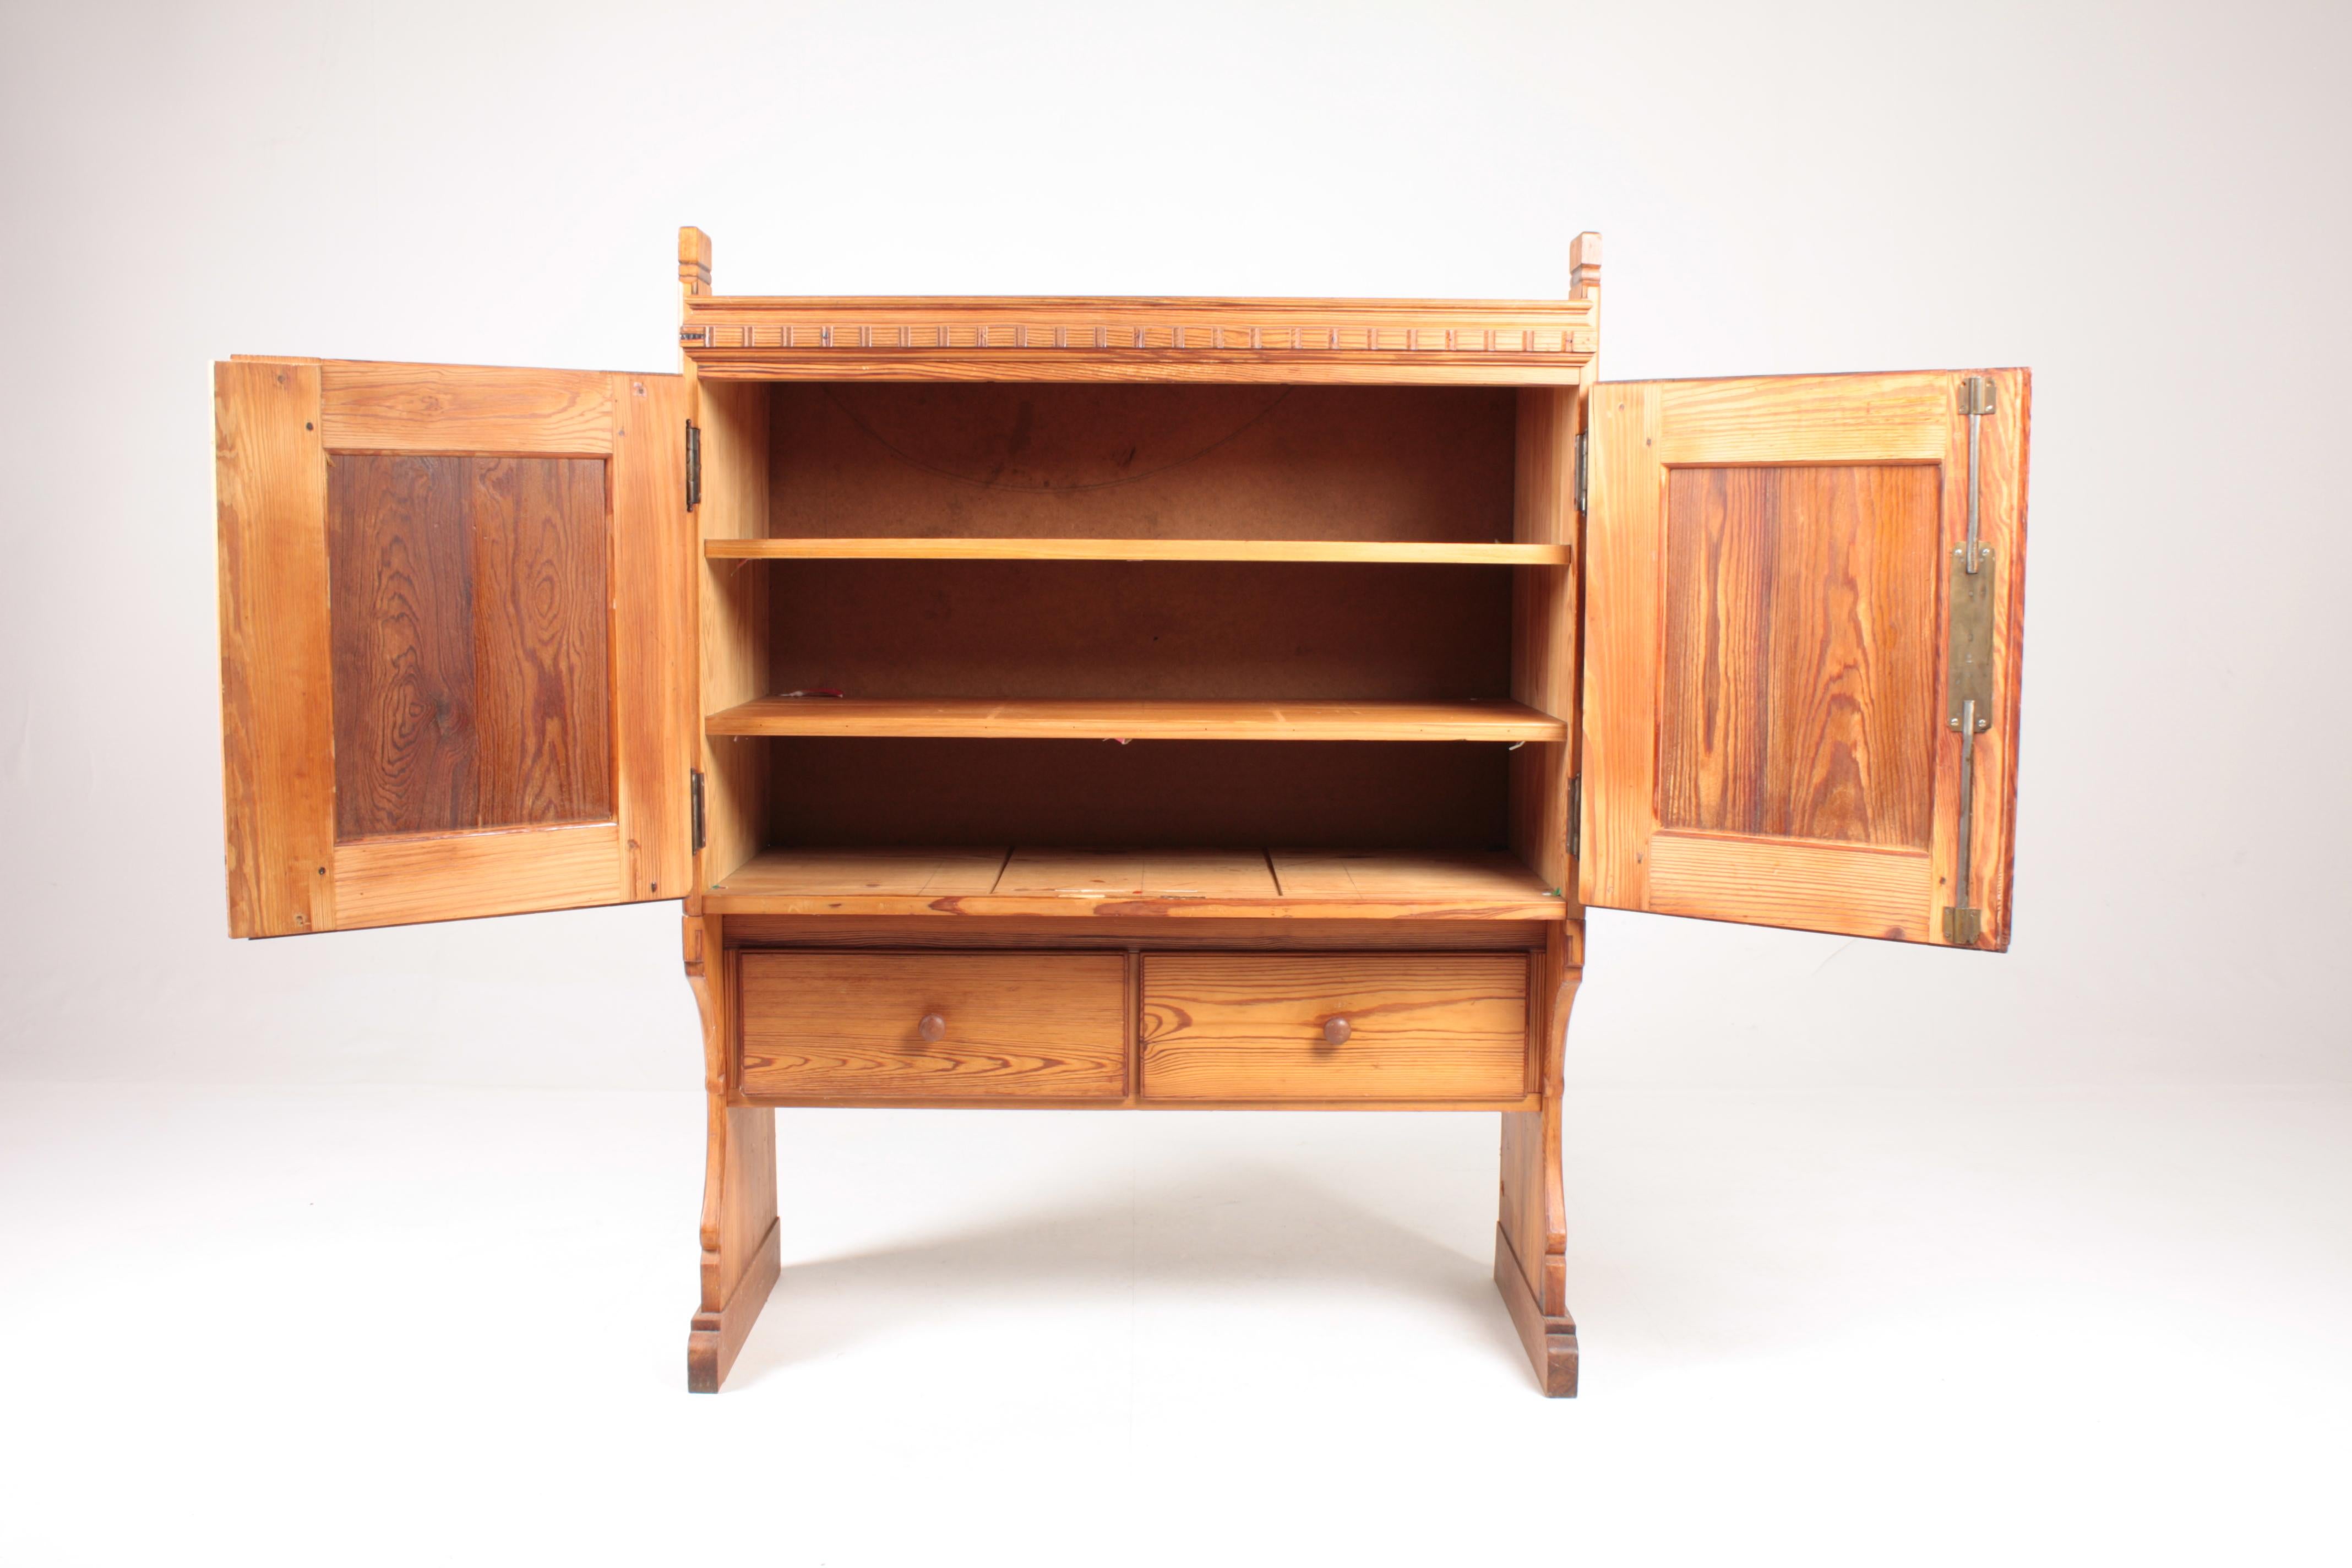 Cabinet in patinated solid pine. Designed by MAA. Martin Nyrop as interior for Copenhagen town hall in 1905. Made in Denmark by Cabinetmaker Rud Rasmussen cabinetmakers. Great condition.

     